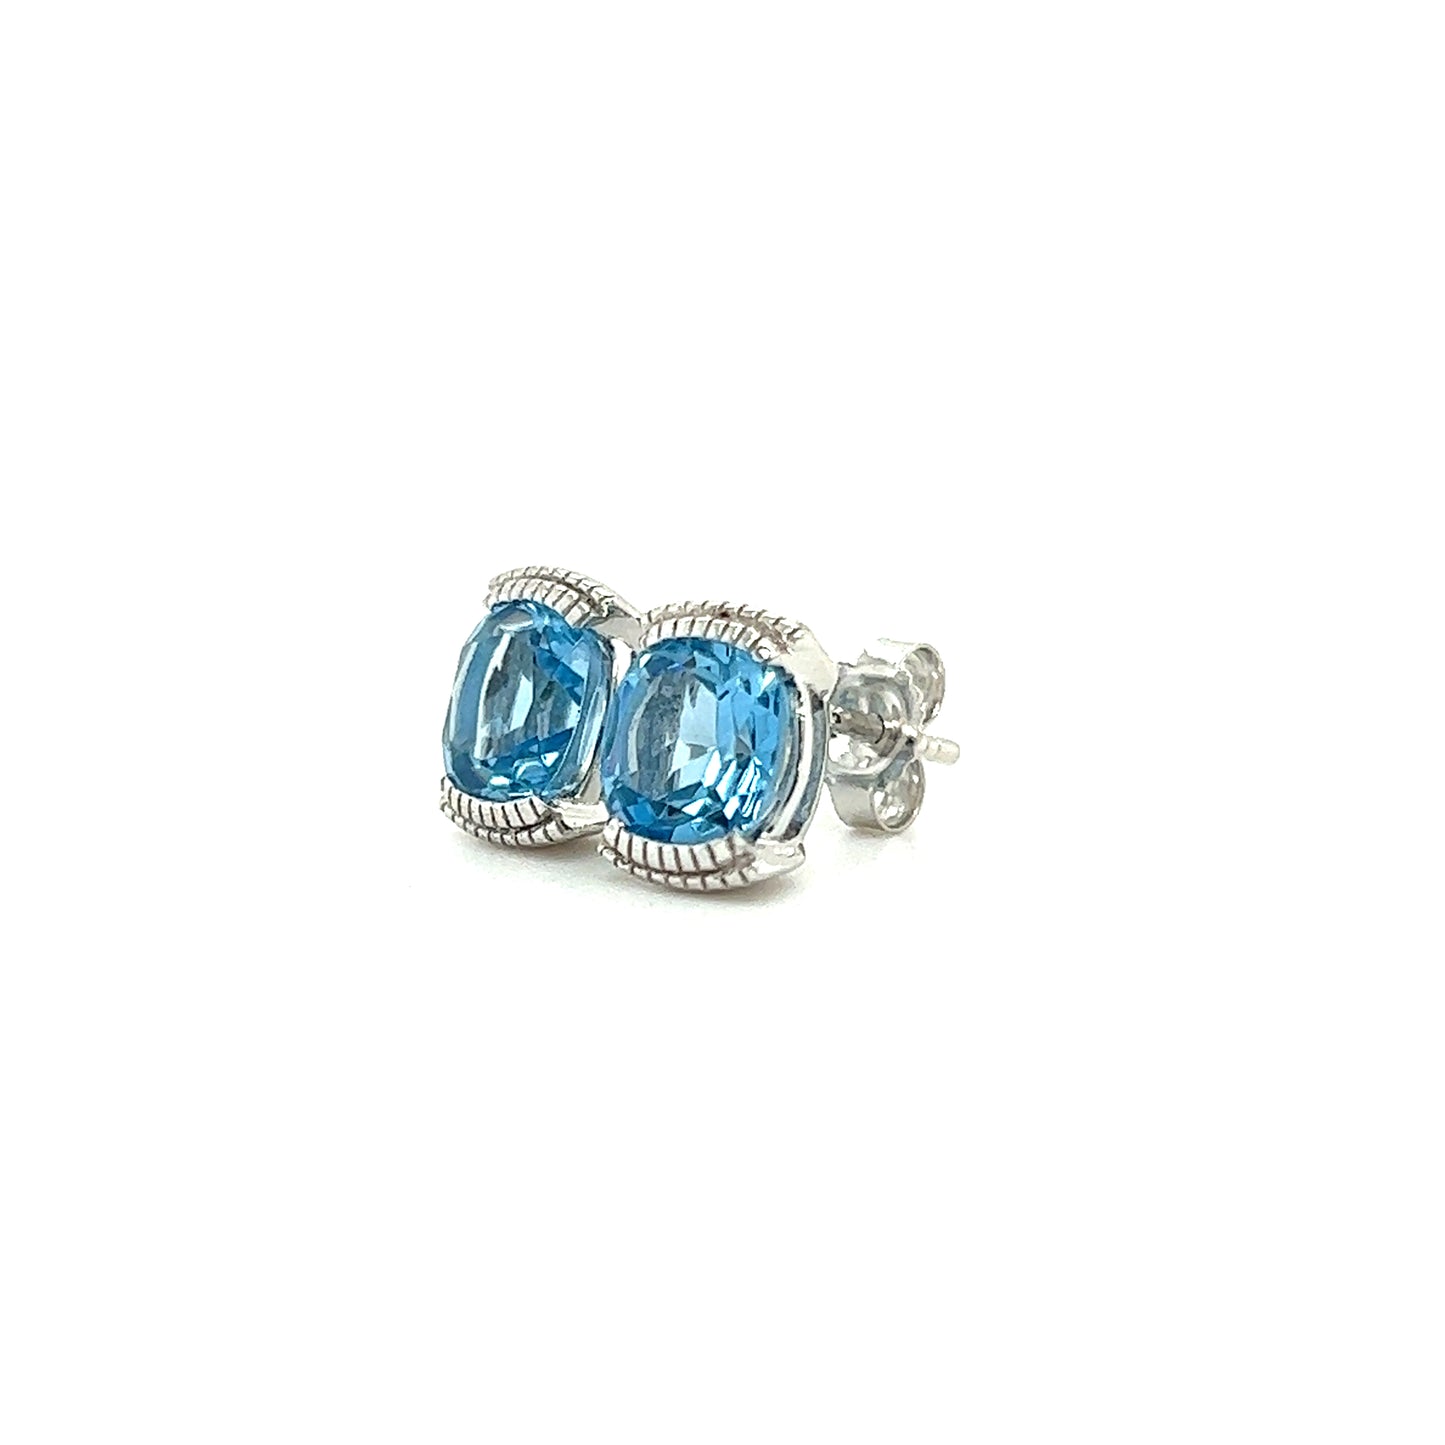 Cushion Blue Topaz Stud Earrings with 1.78ctw of Swiss Blue Topaz in 14K White Right Side View